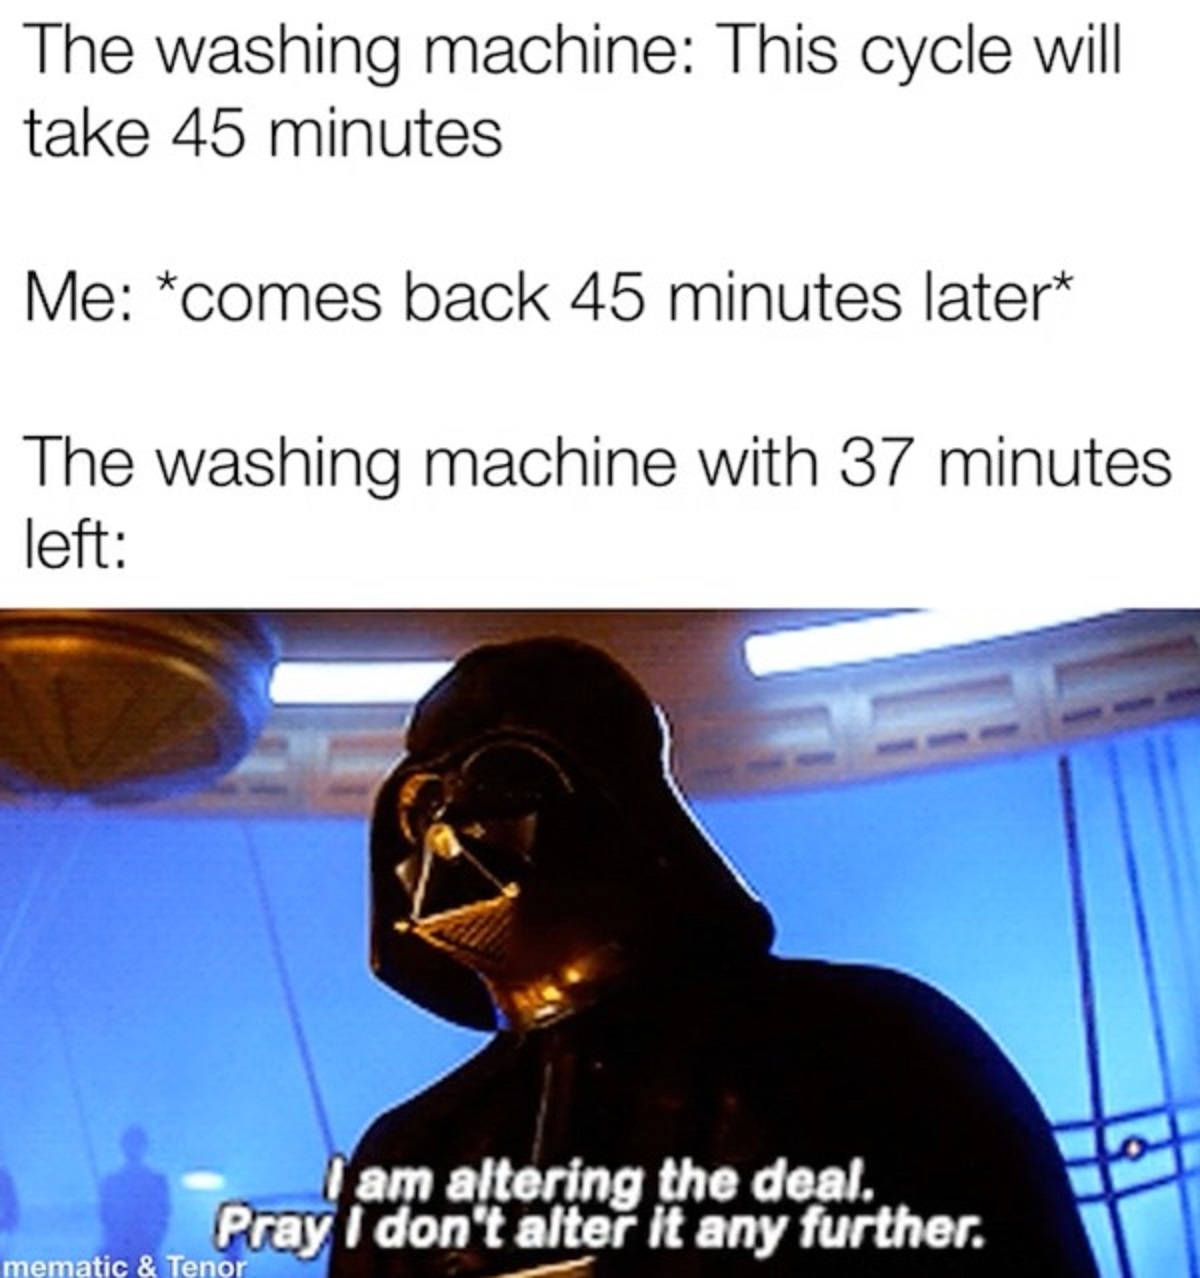 darth vader - The washing machine This cycle will take 45 minutes Me comes back 45 minutes later The washing machine with 37 minutes left am altering the deal. Pray I don't alter it any further. mematic & Tenor